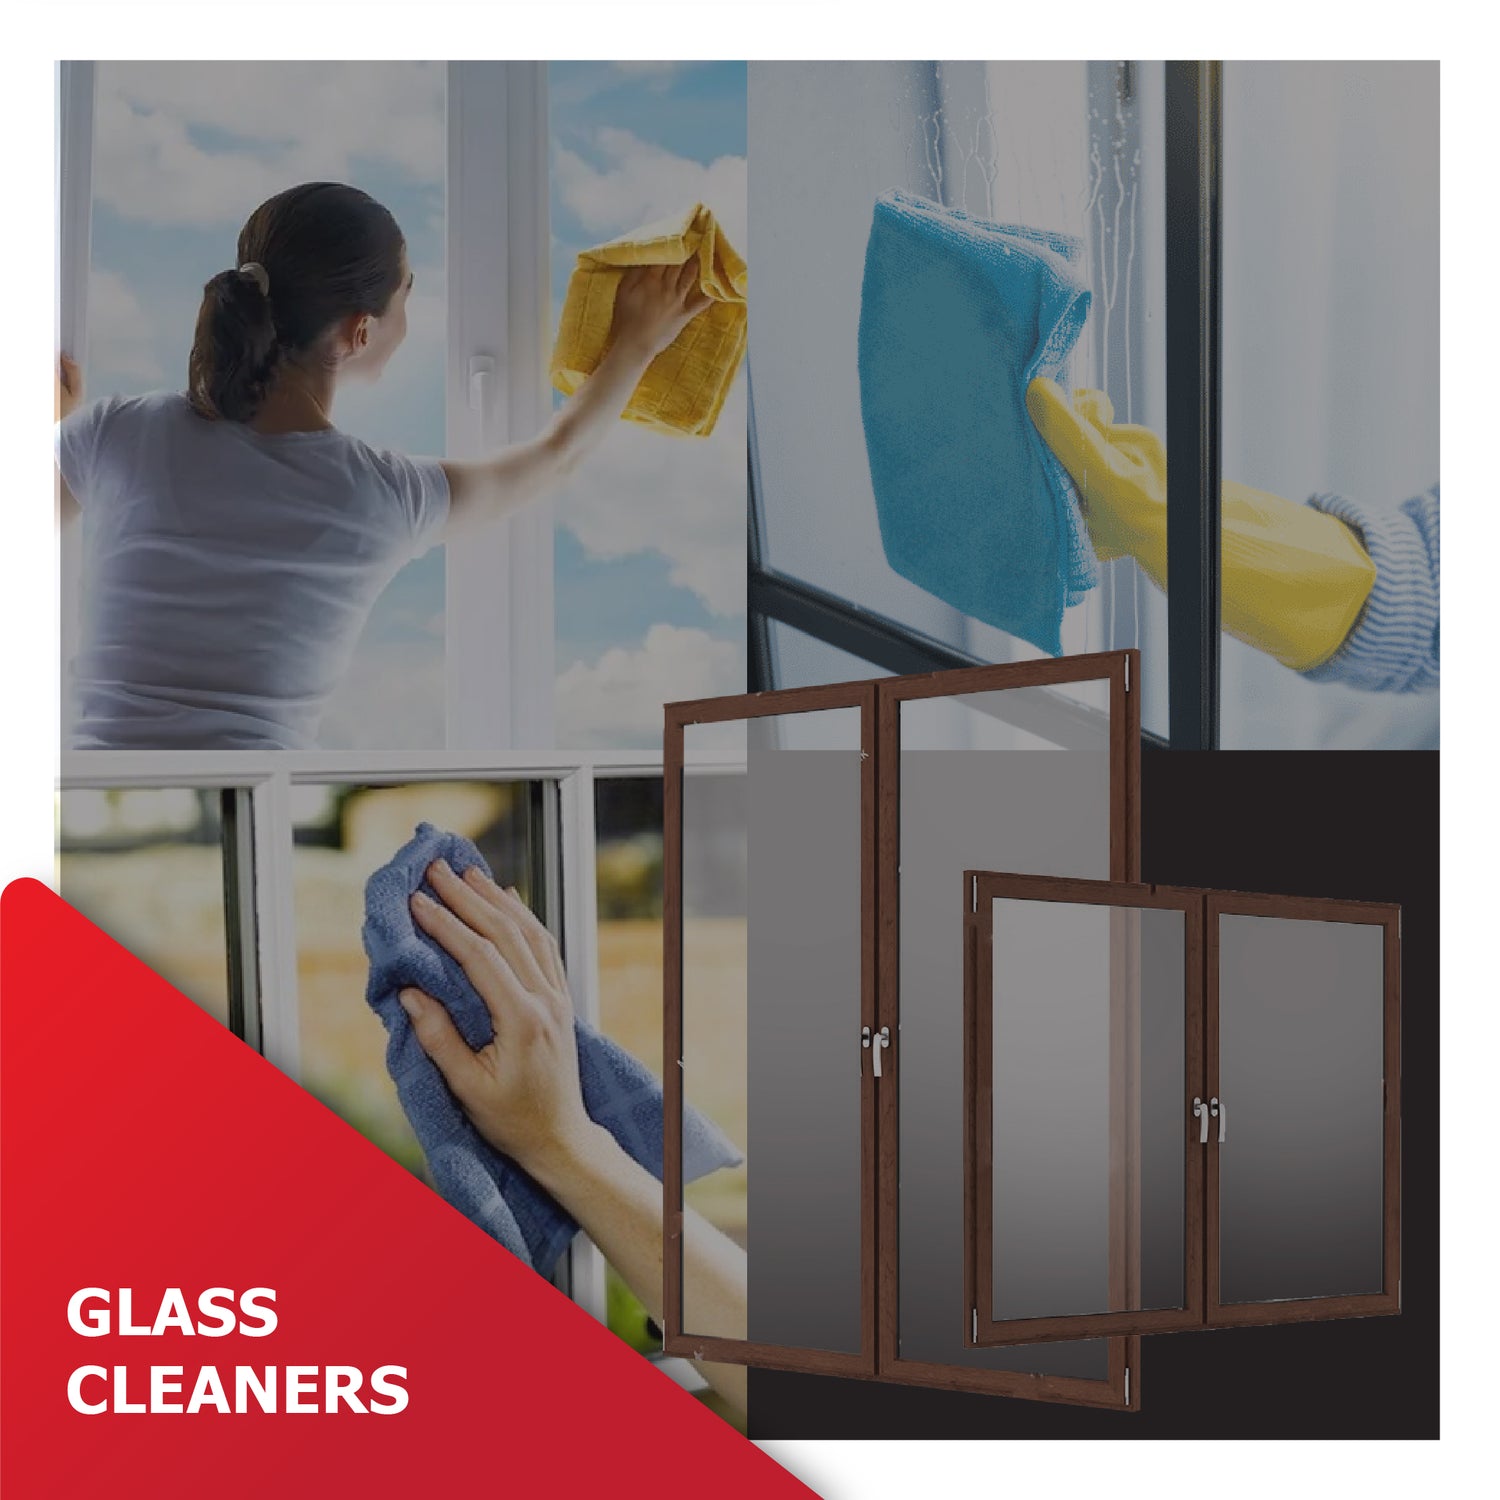 Glass Cleaners | Category